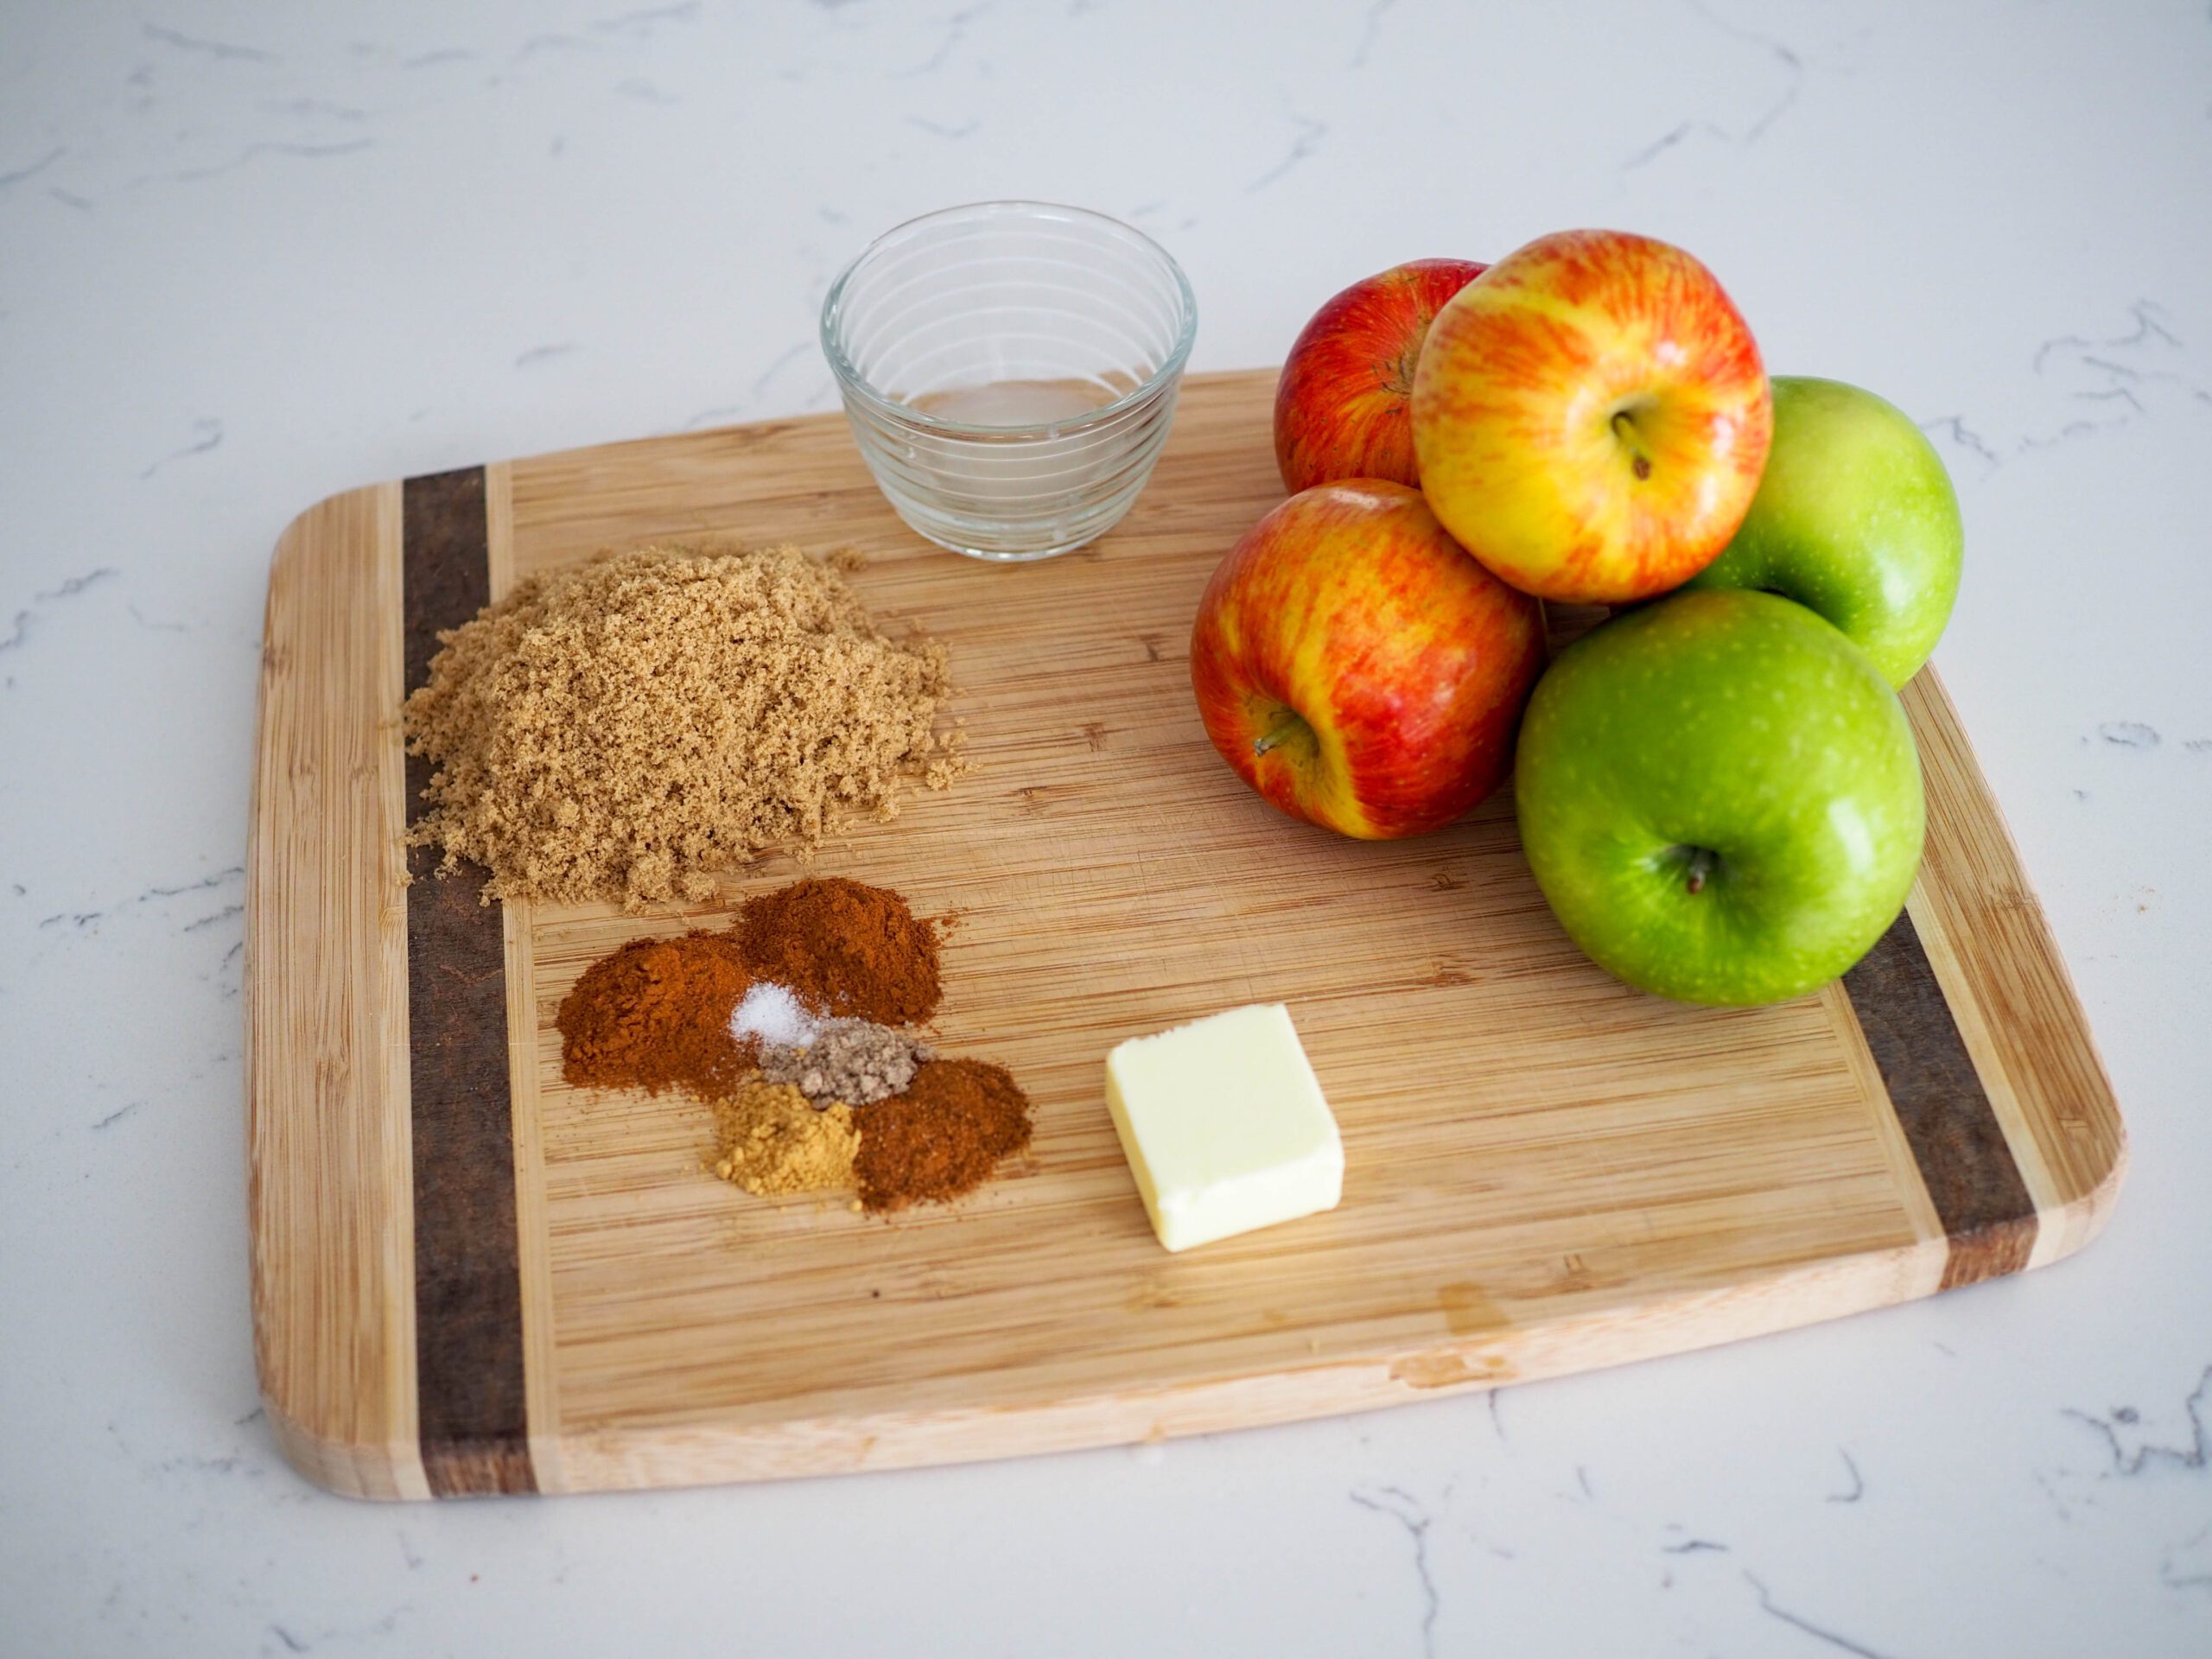 Spices, brown sugar, lemon juice, apples, and butter on a wooden cutting board